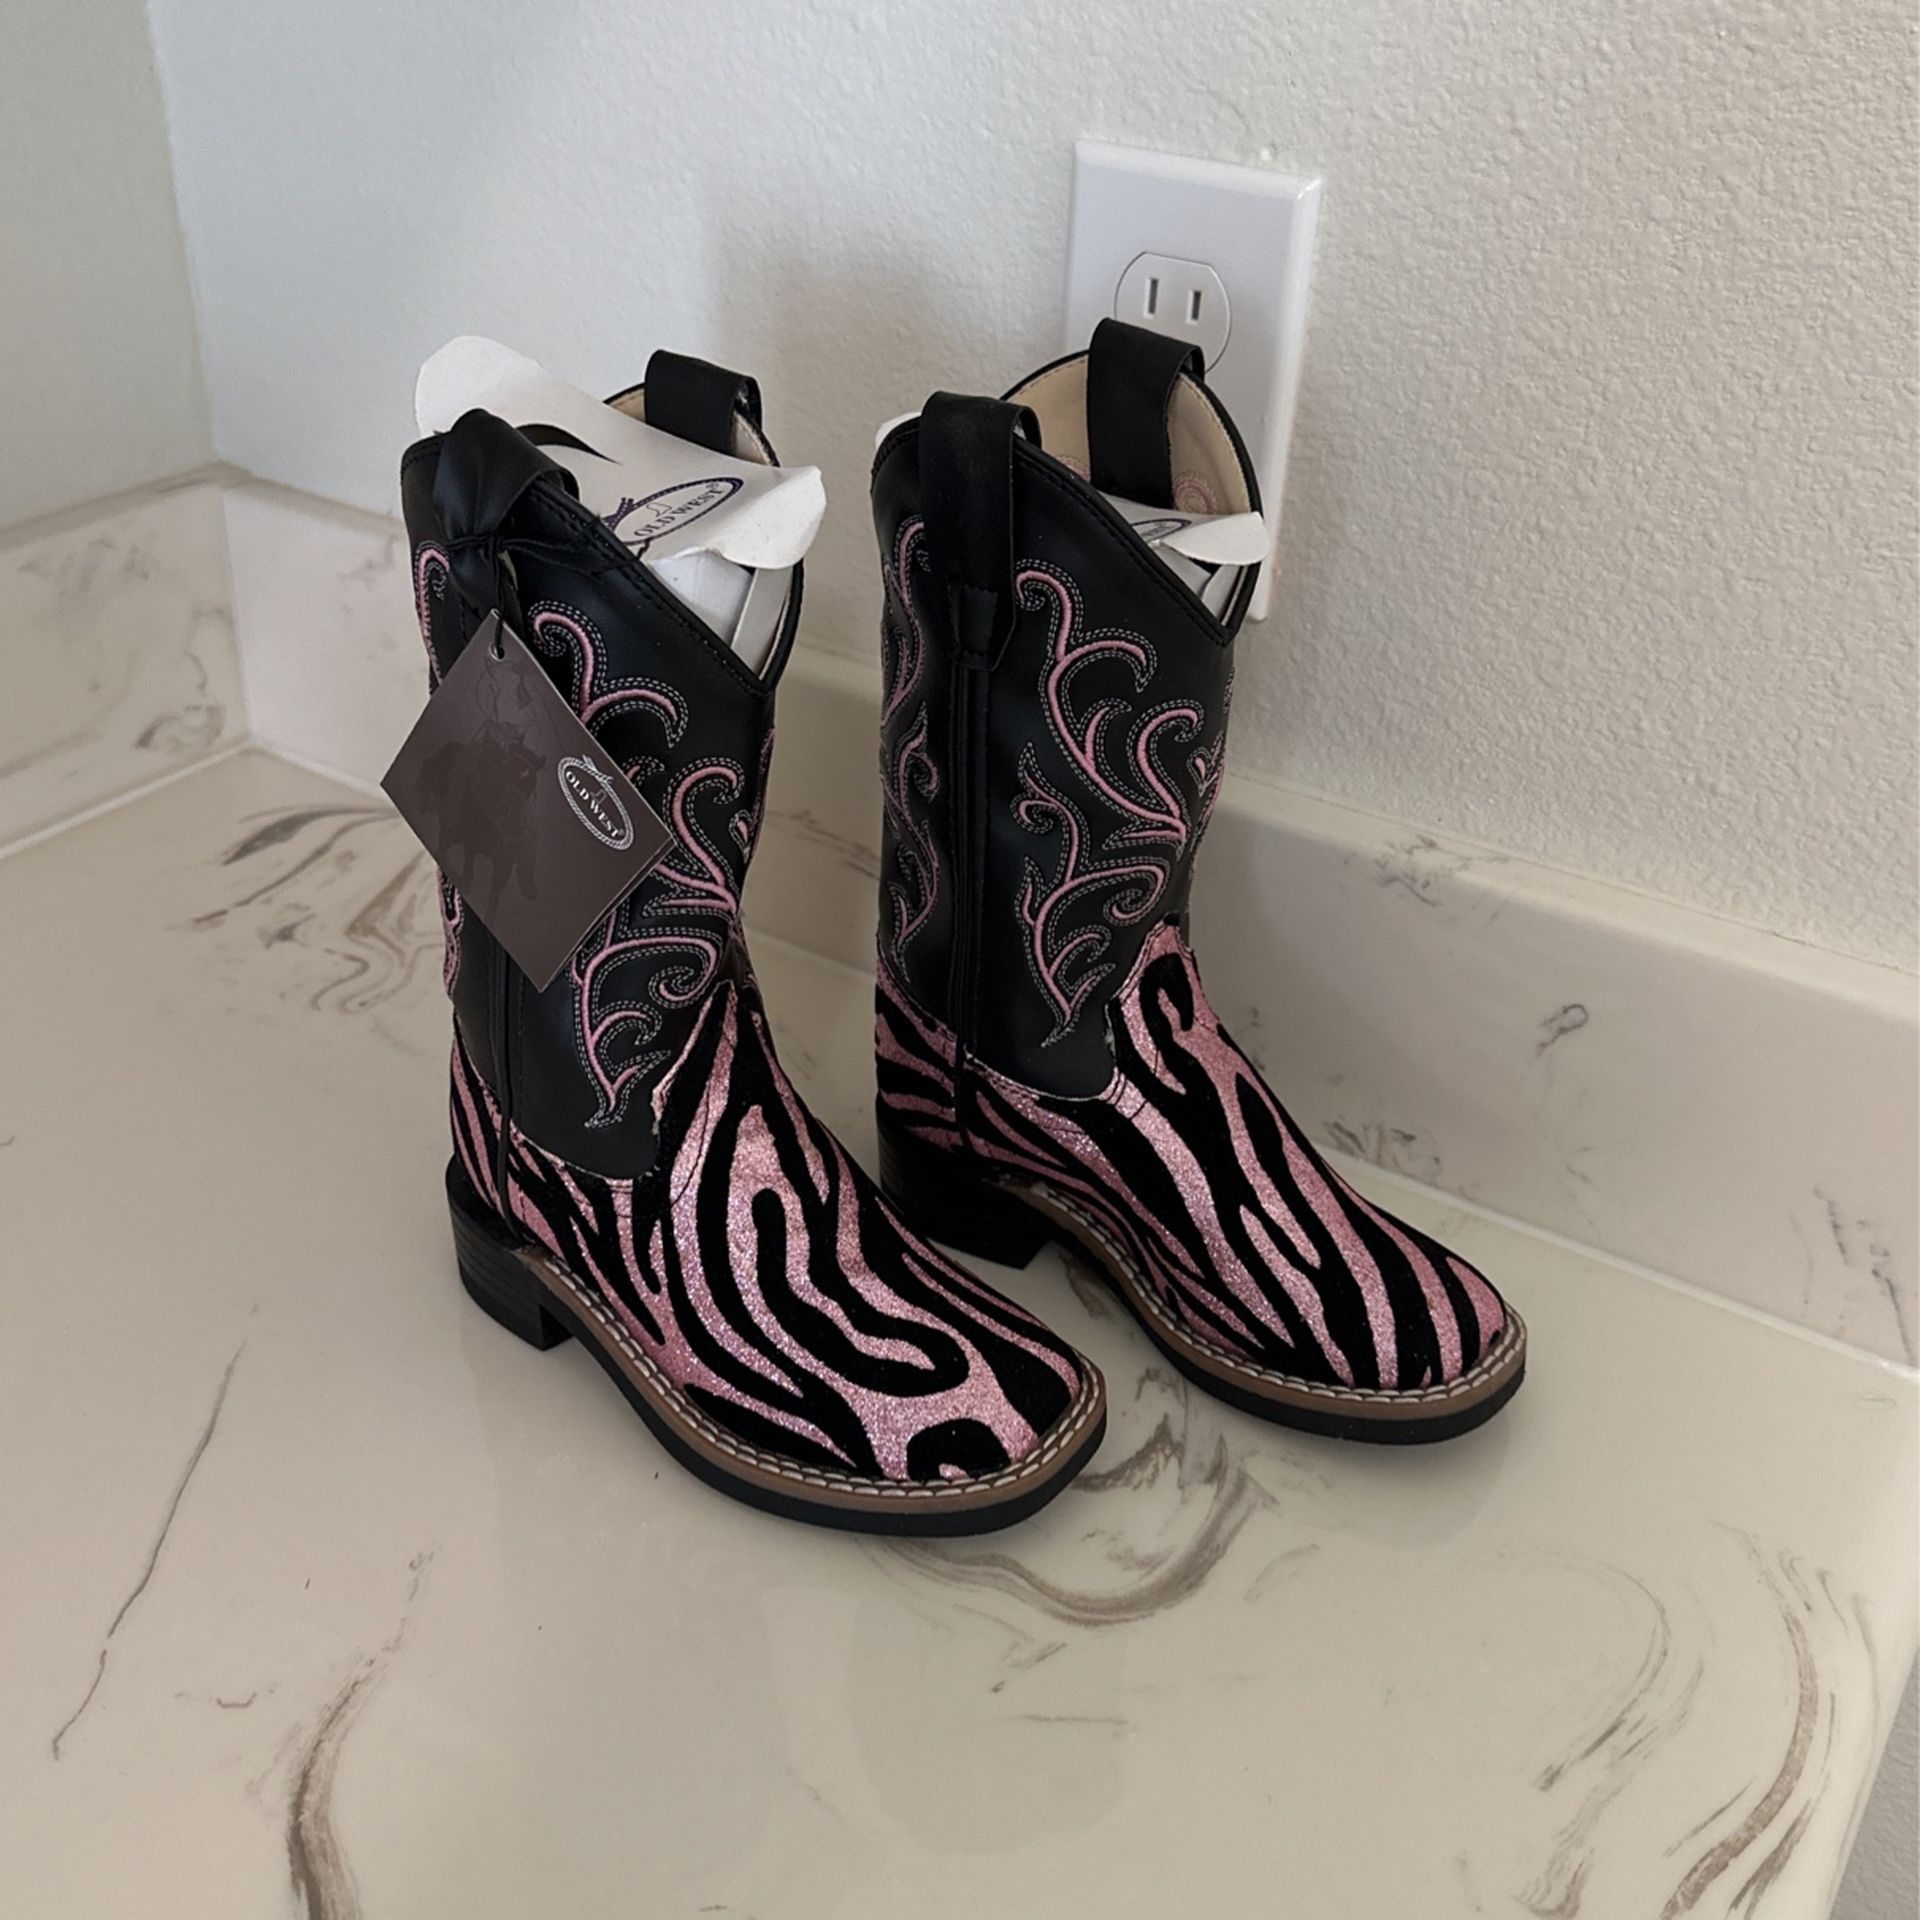 Old West Toddler Boots: Size 9